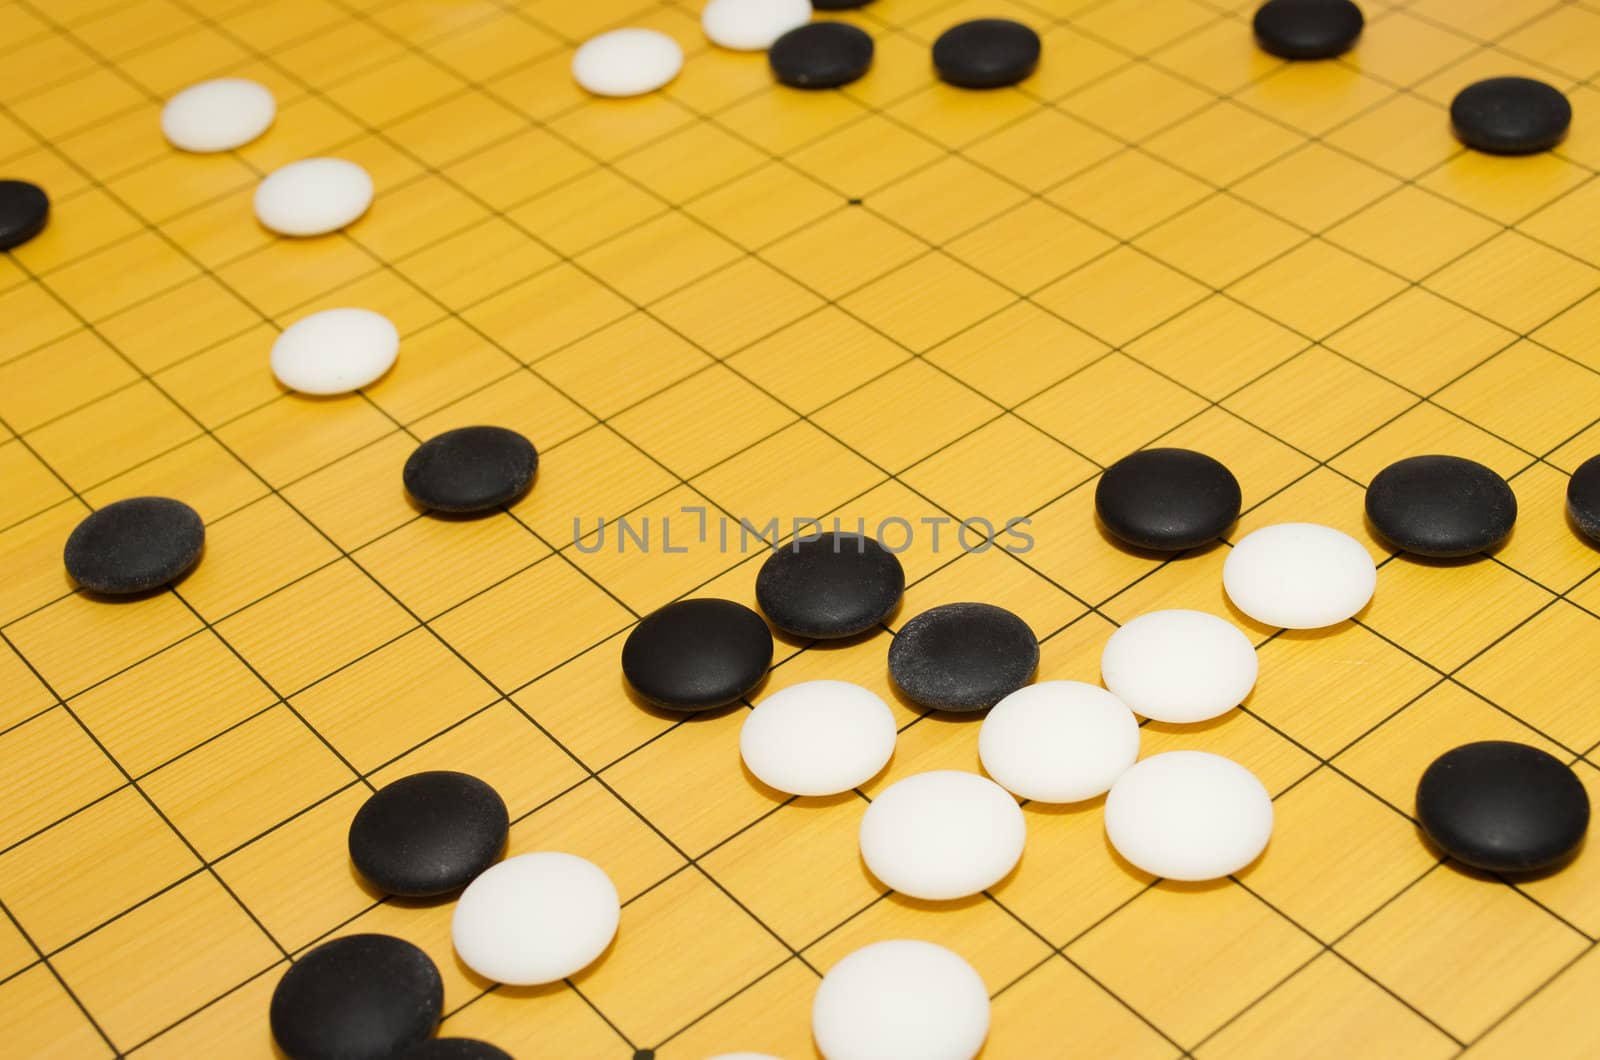 During a game of go by nprause